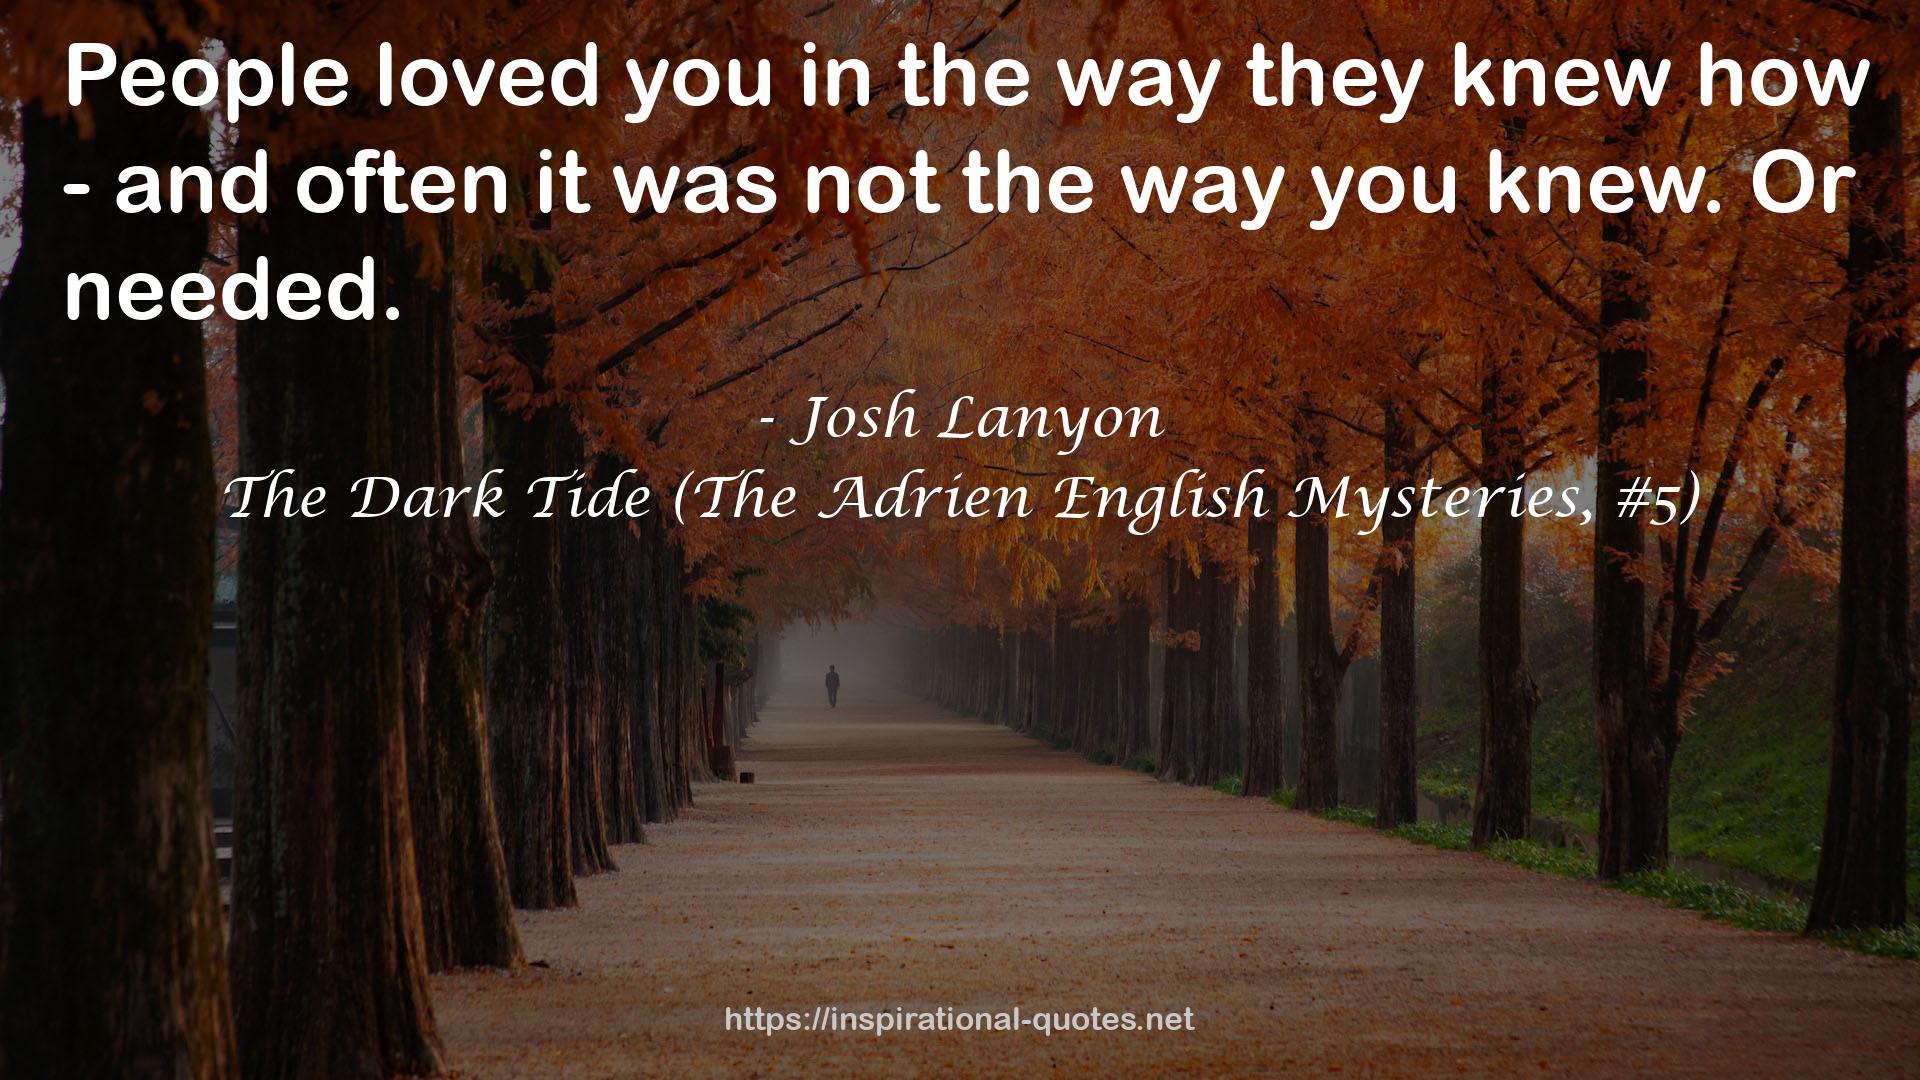 The Dark Tide (The Adrien English Mysteries, #5) QUOTES